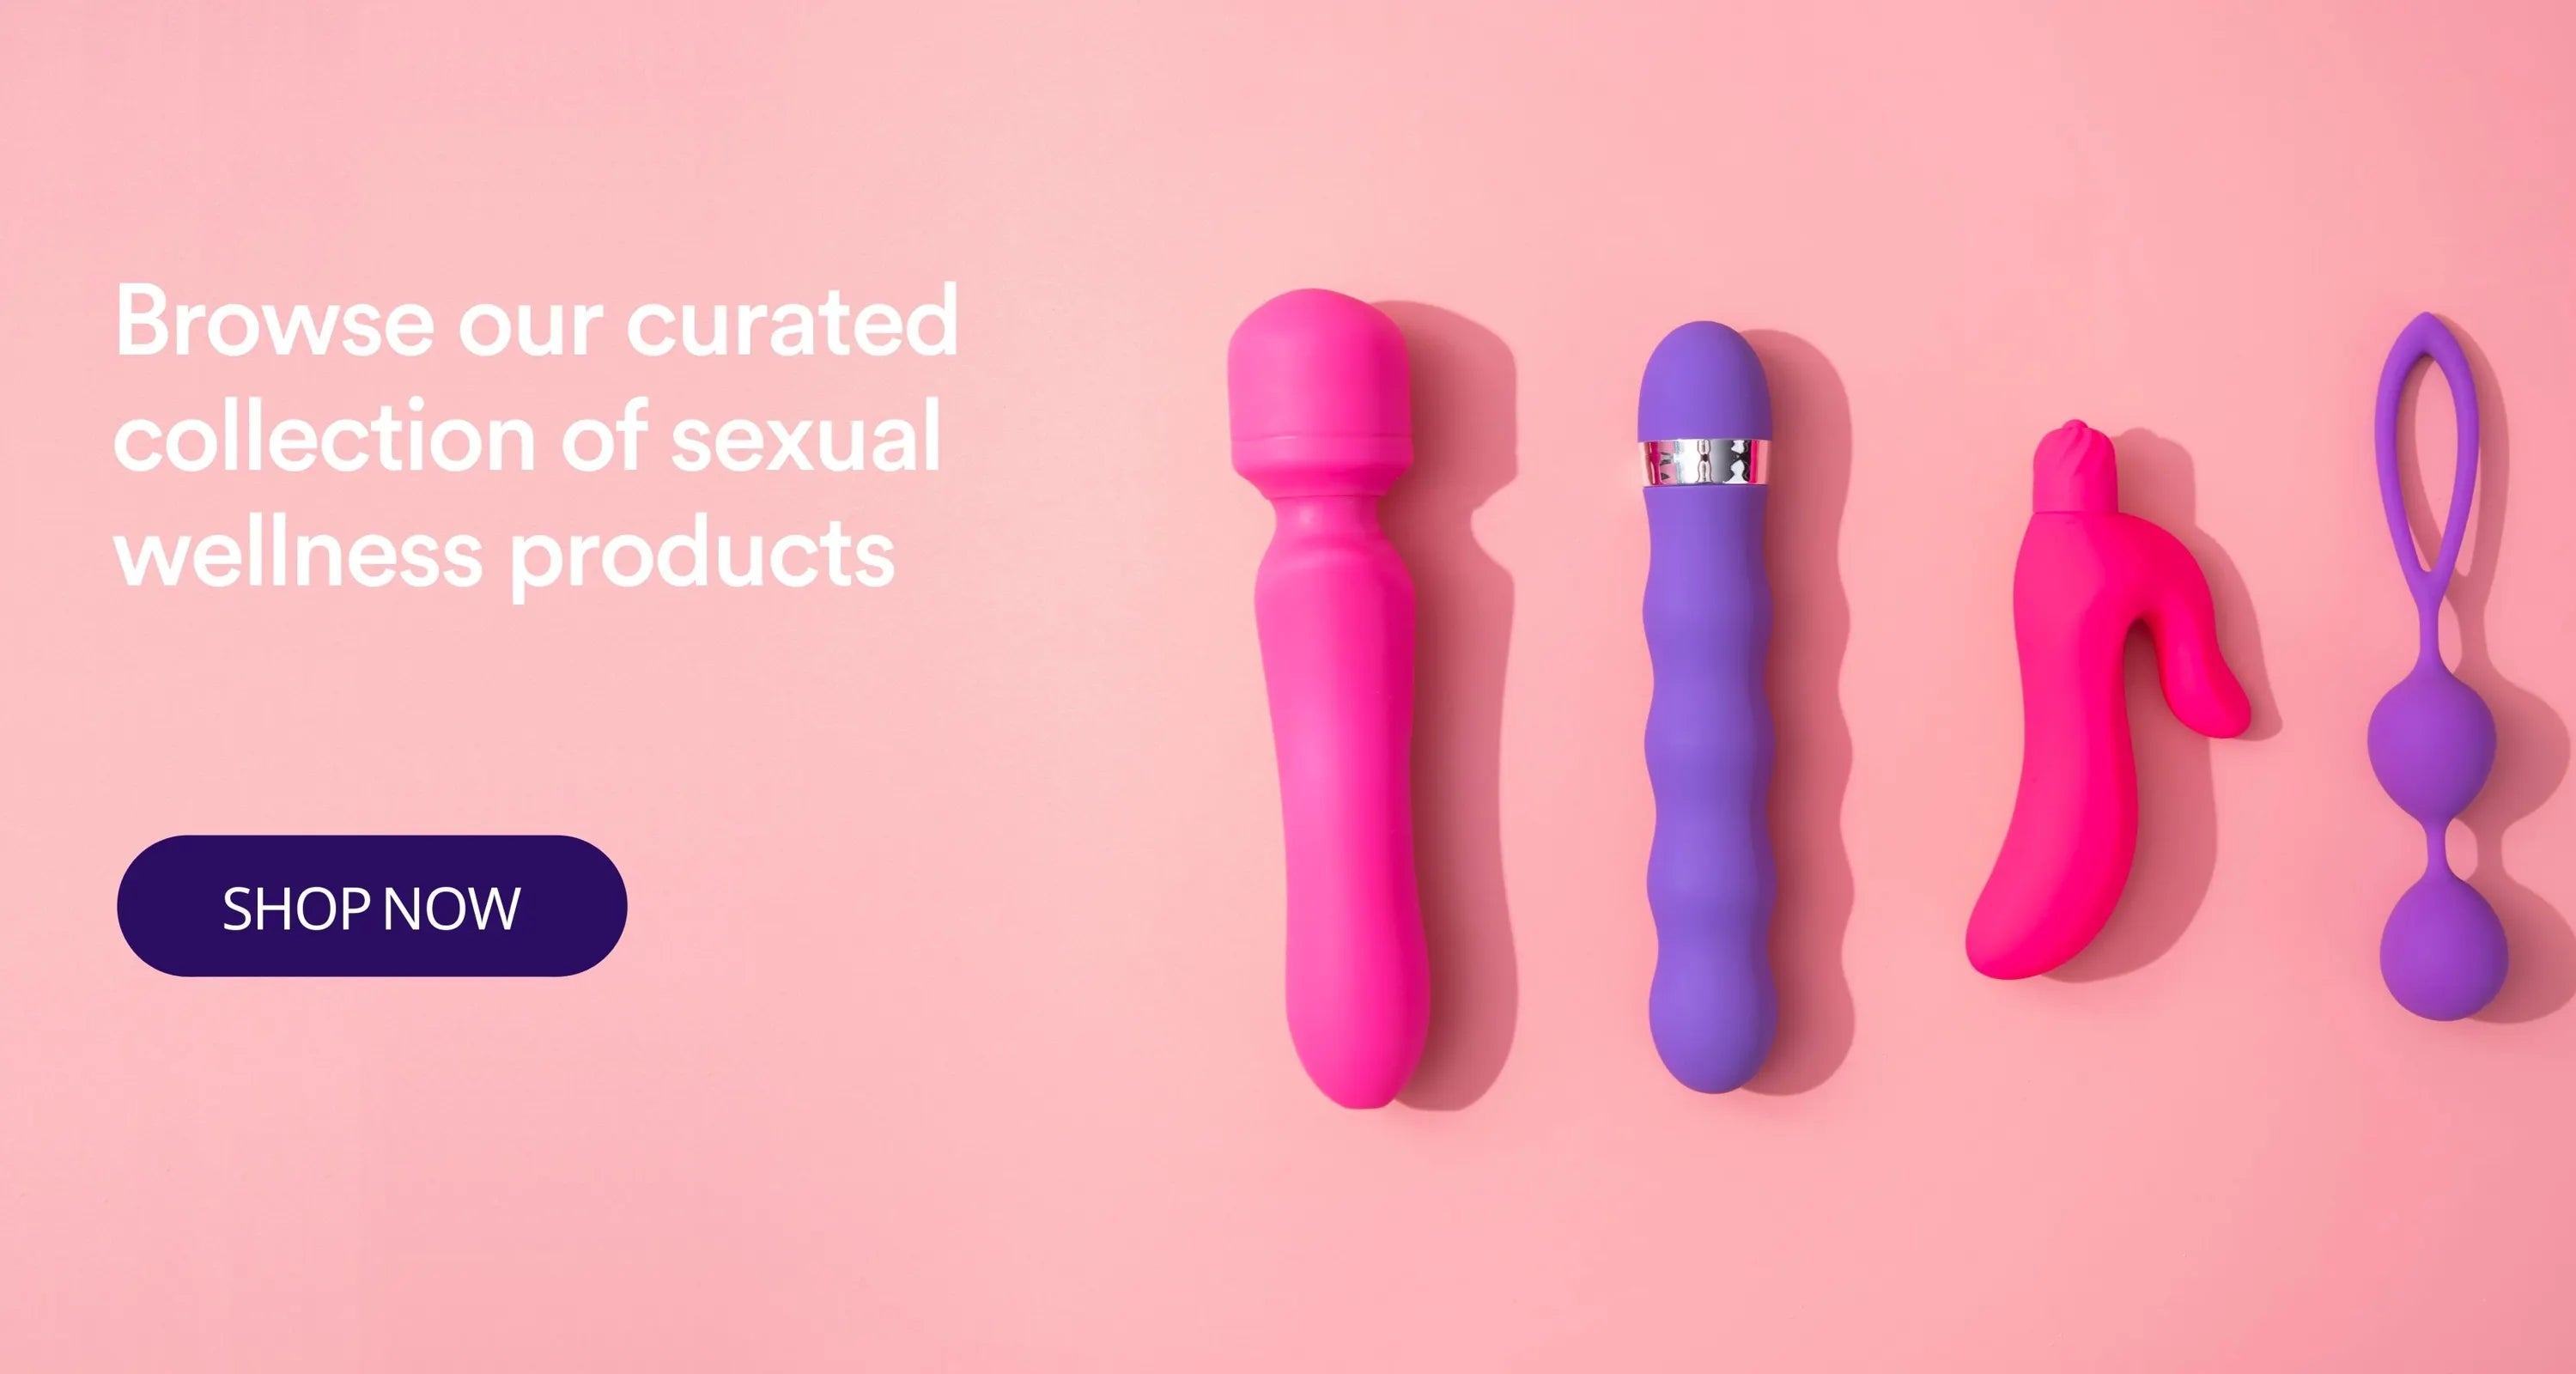 Kama sutra sex toys